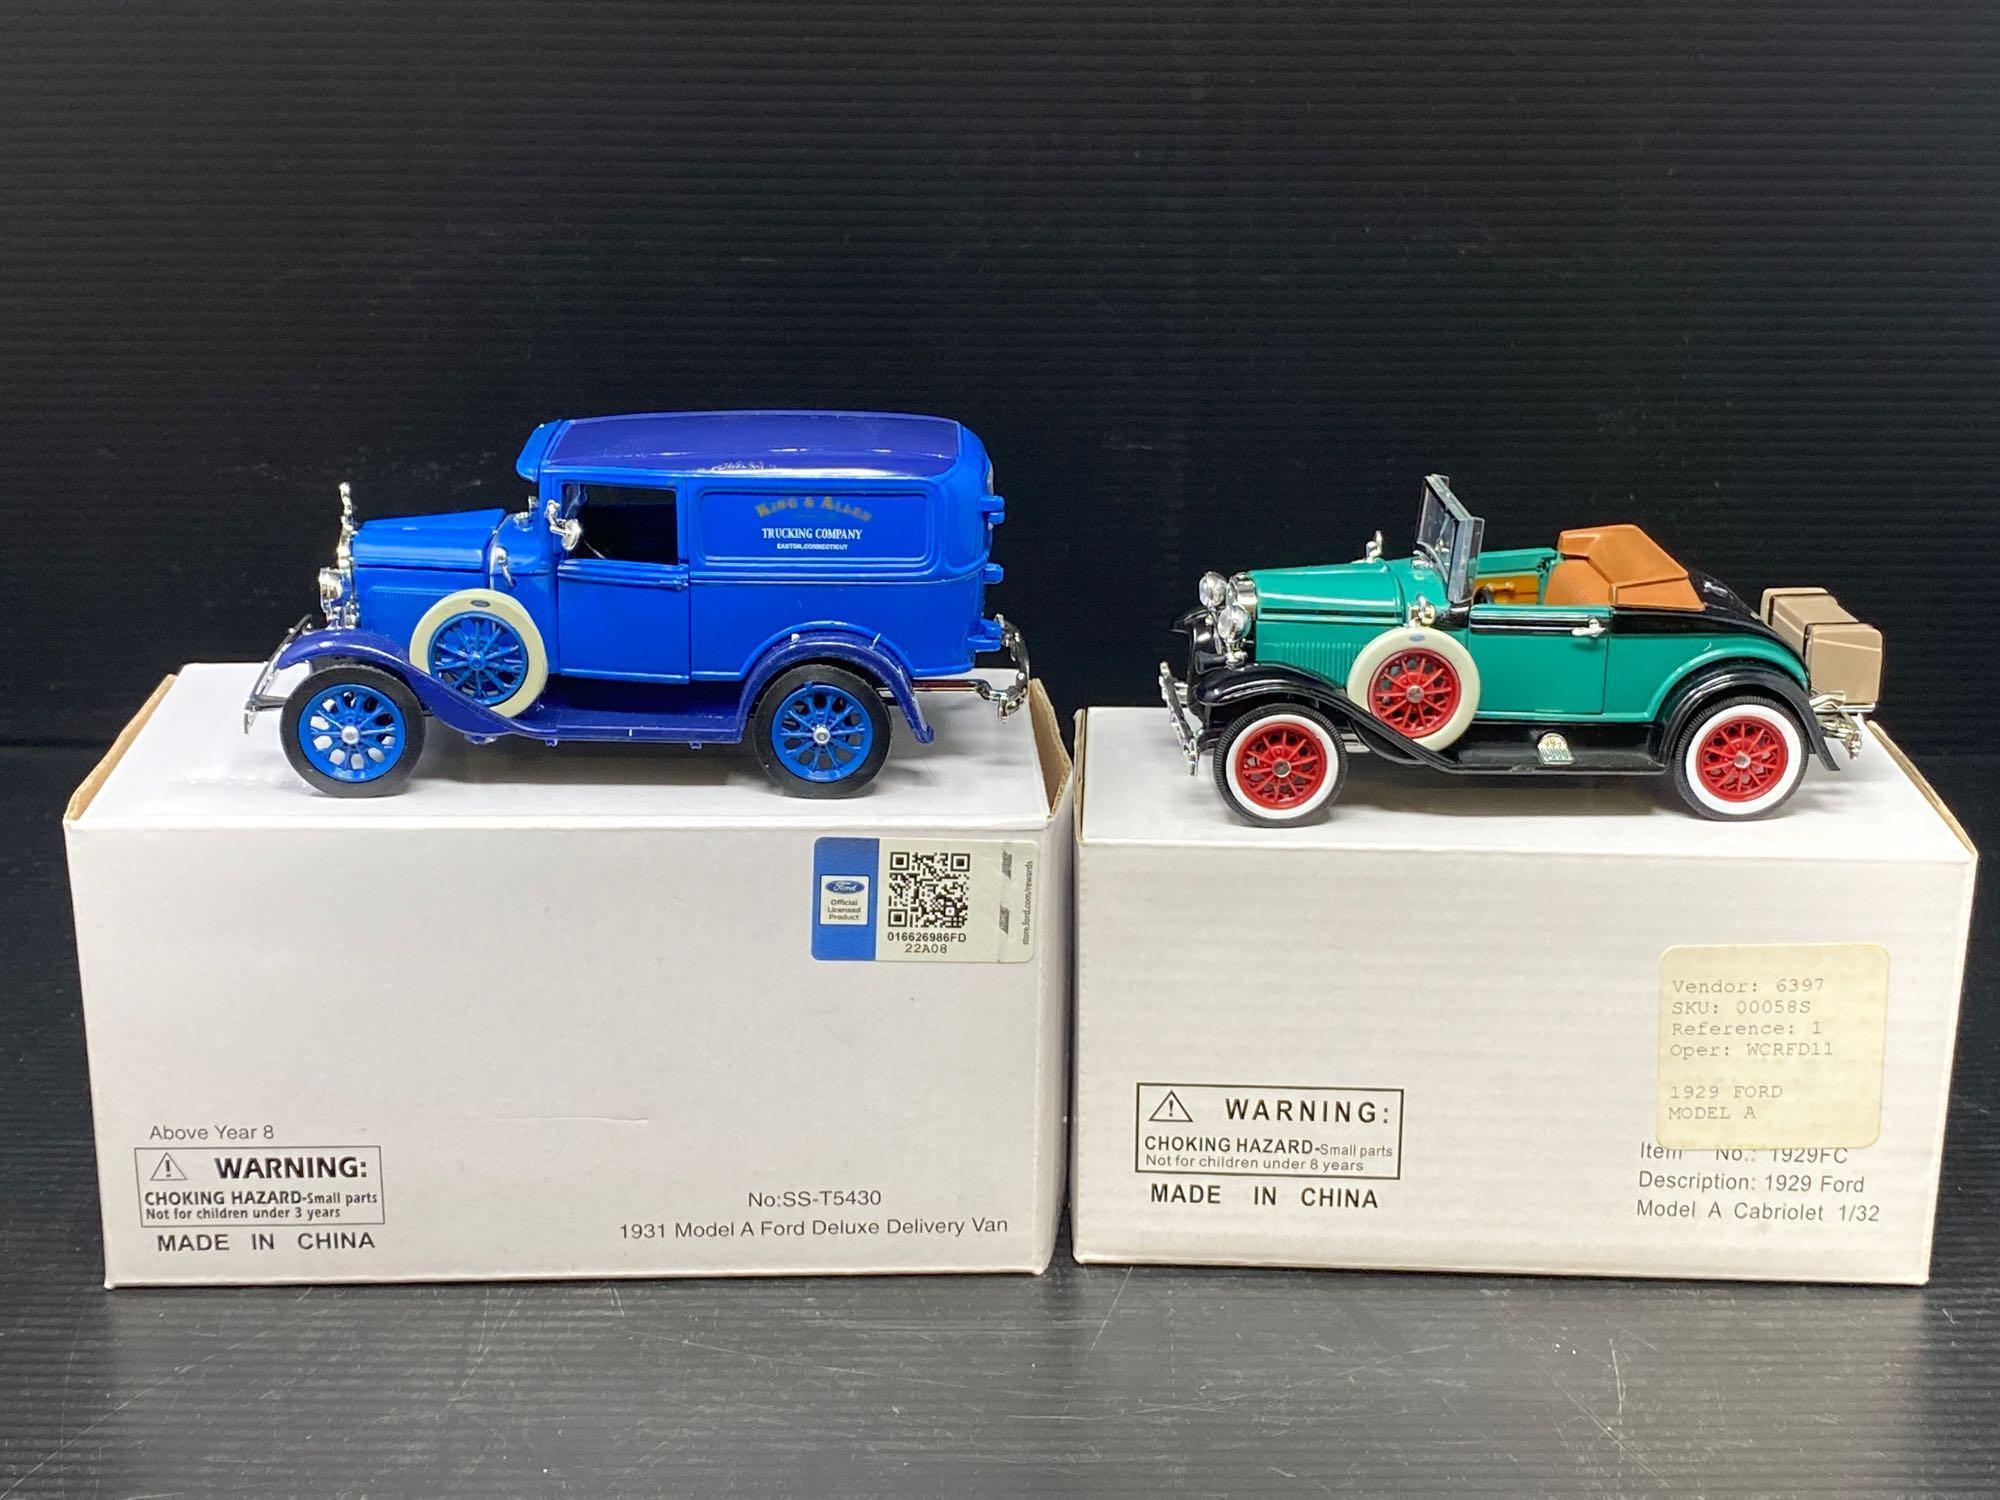 1929 Ford Roadster and 1931 Ford Model A with Original Boxes